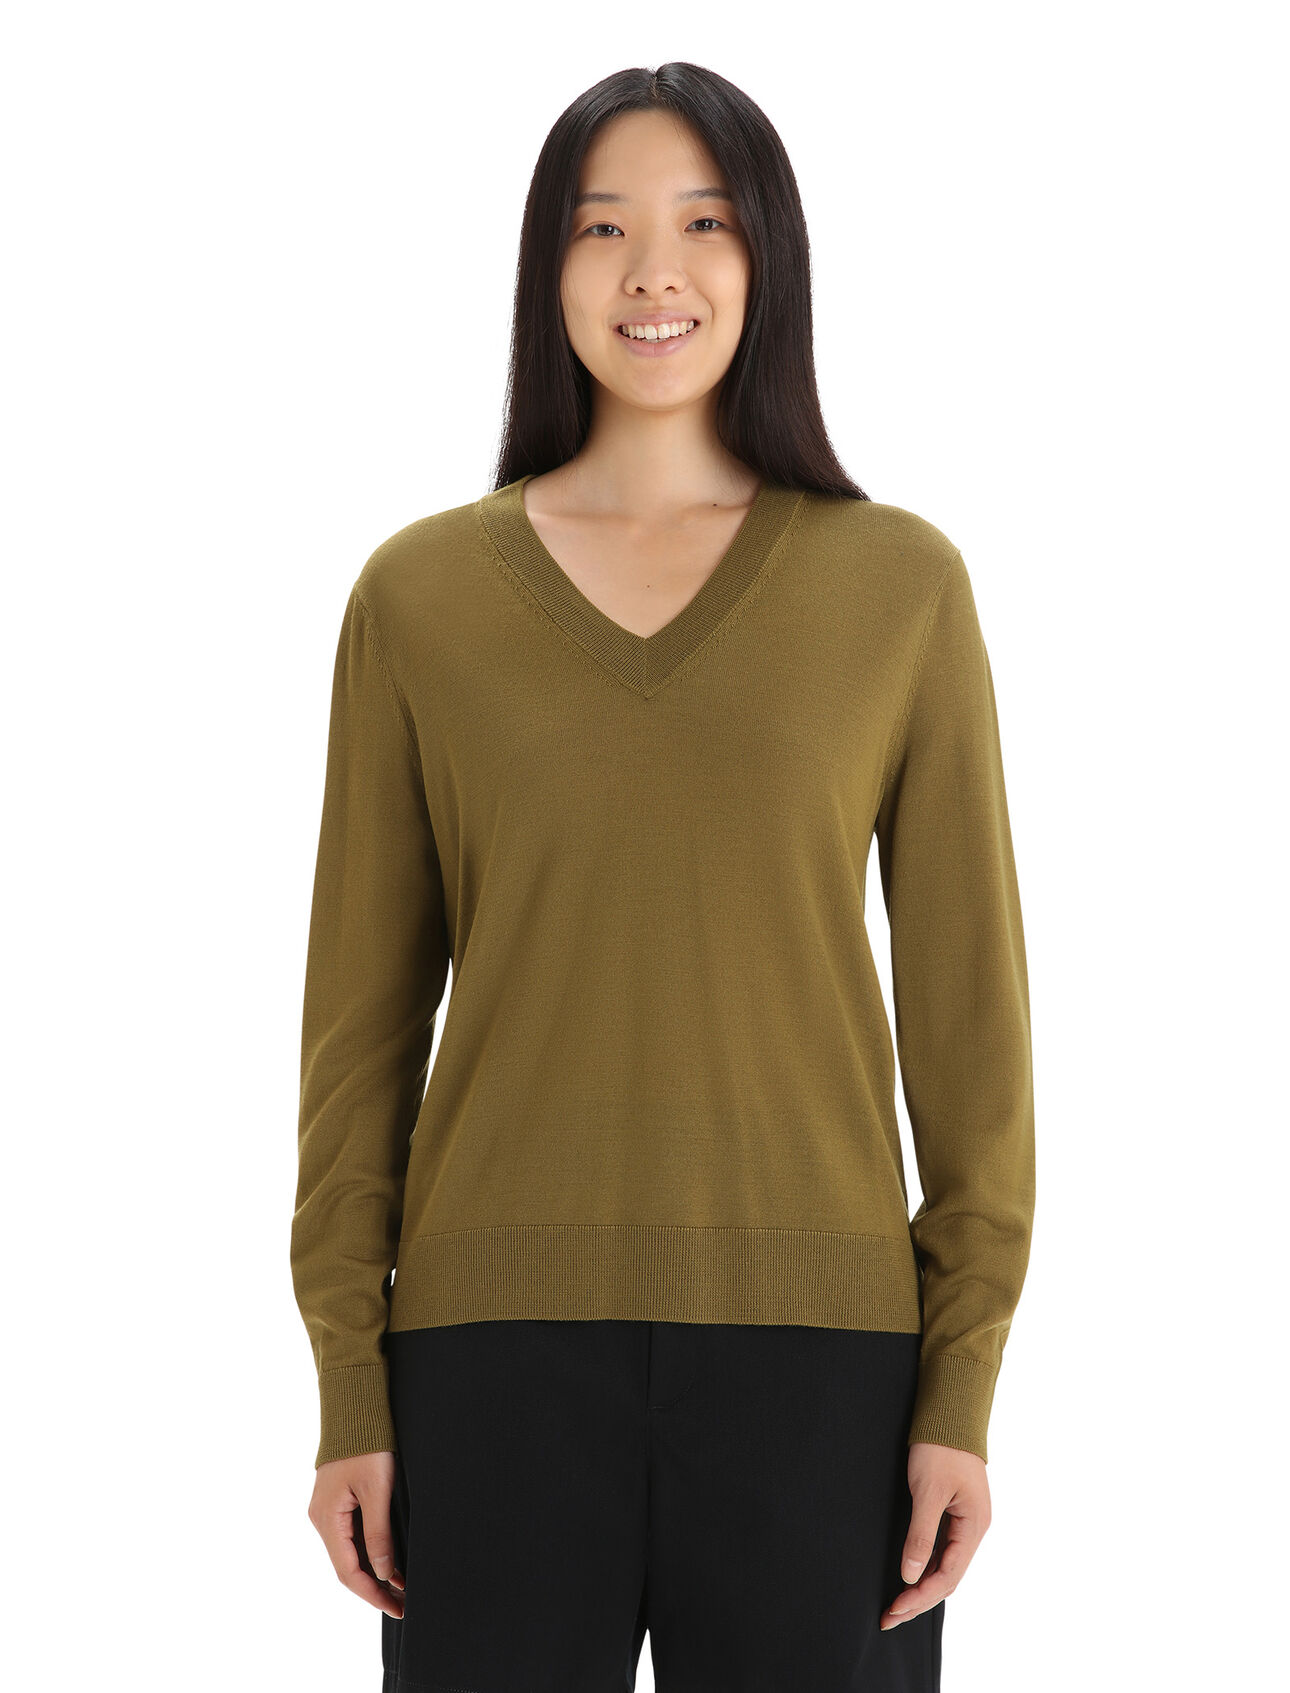 Womens Merino Wilcox Long Sleeve V Neck Sweater A classic everyday sweater made with ultra-fine gauge merino wool for unparalleled softness, the Wilcox Long Sleeve V Neck Sweater is perfect for days when you need a light extra layer.